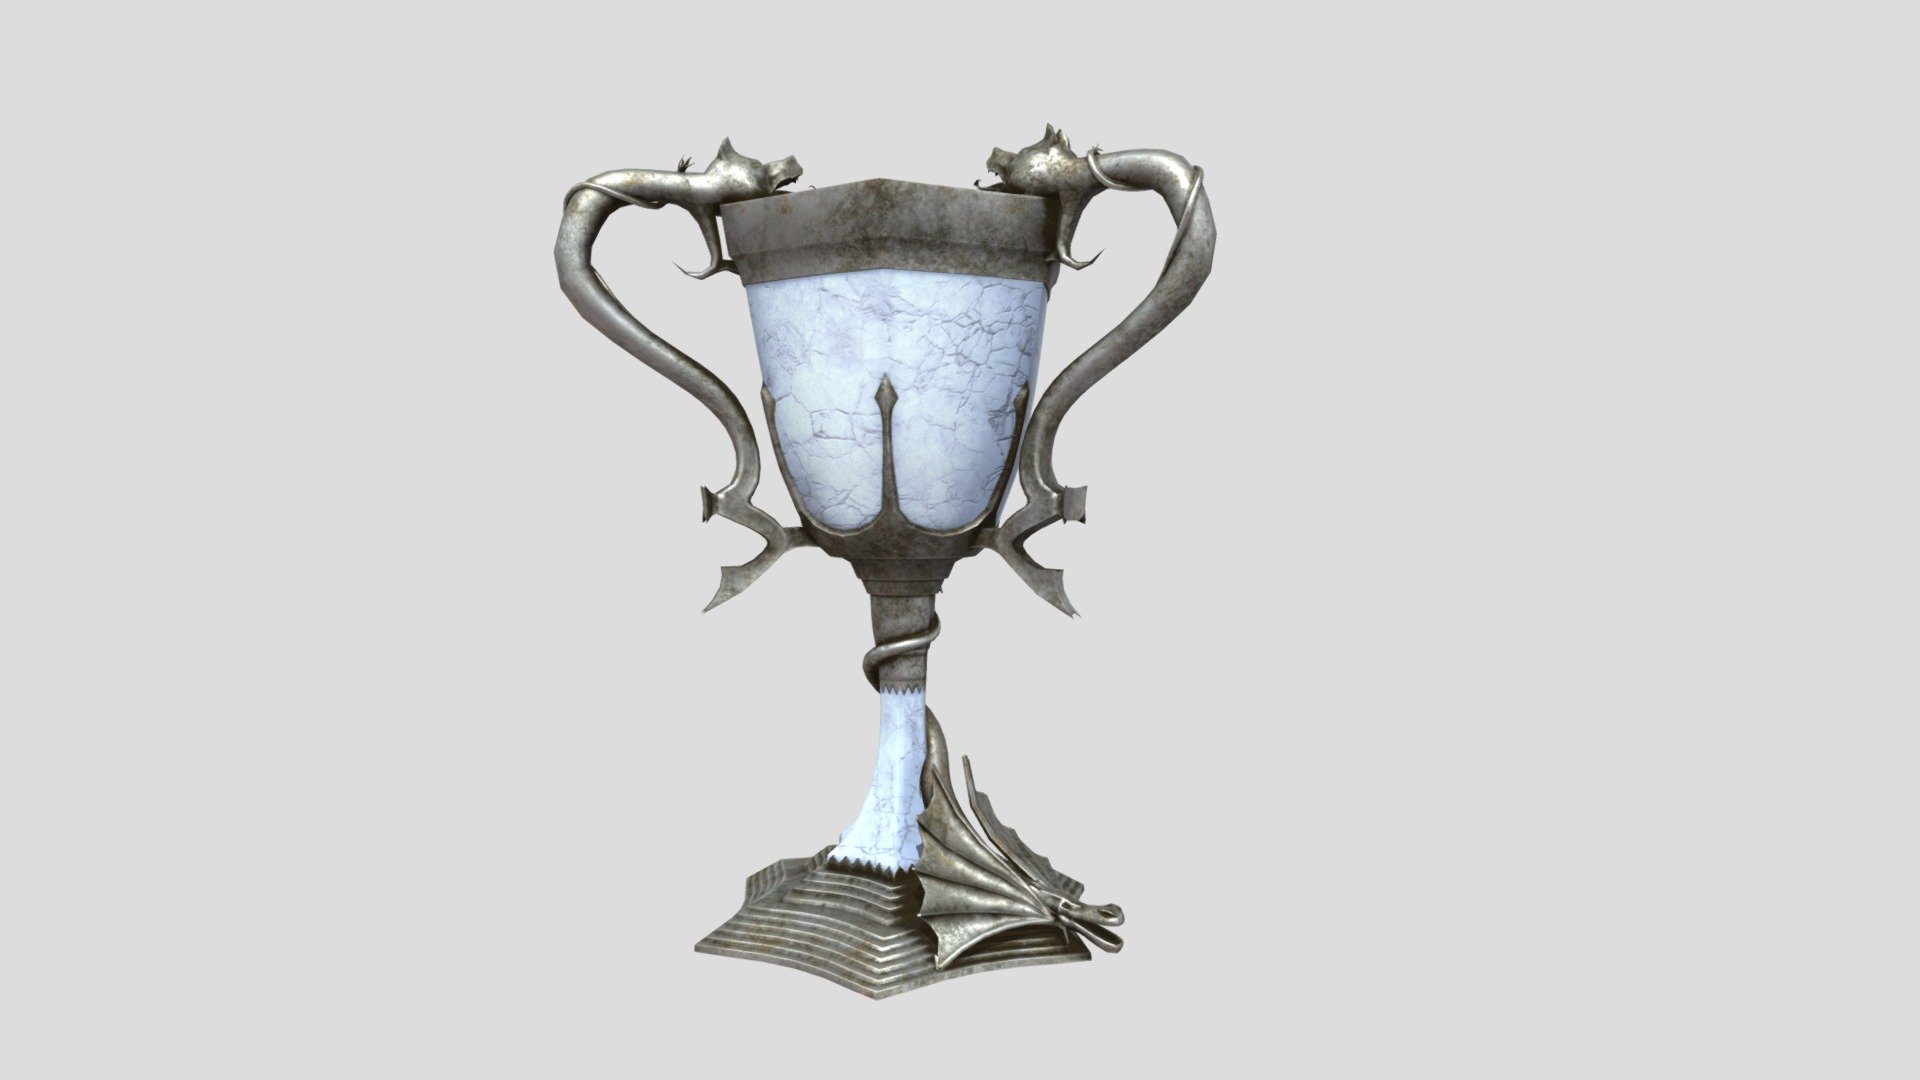 triwizard-cup-download-free-3d-model-by-pixeldog4ever-4193965